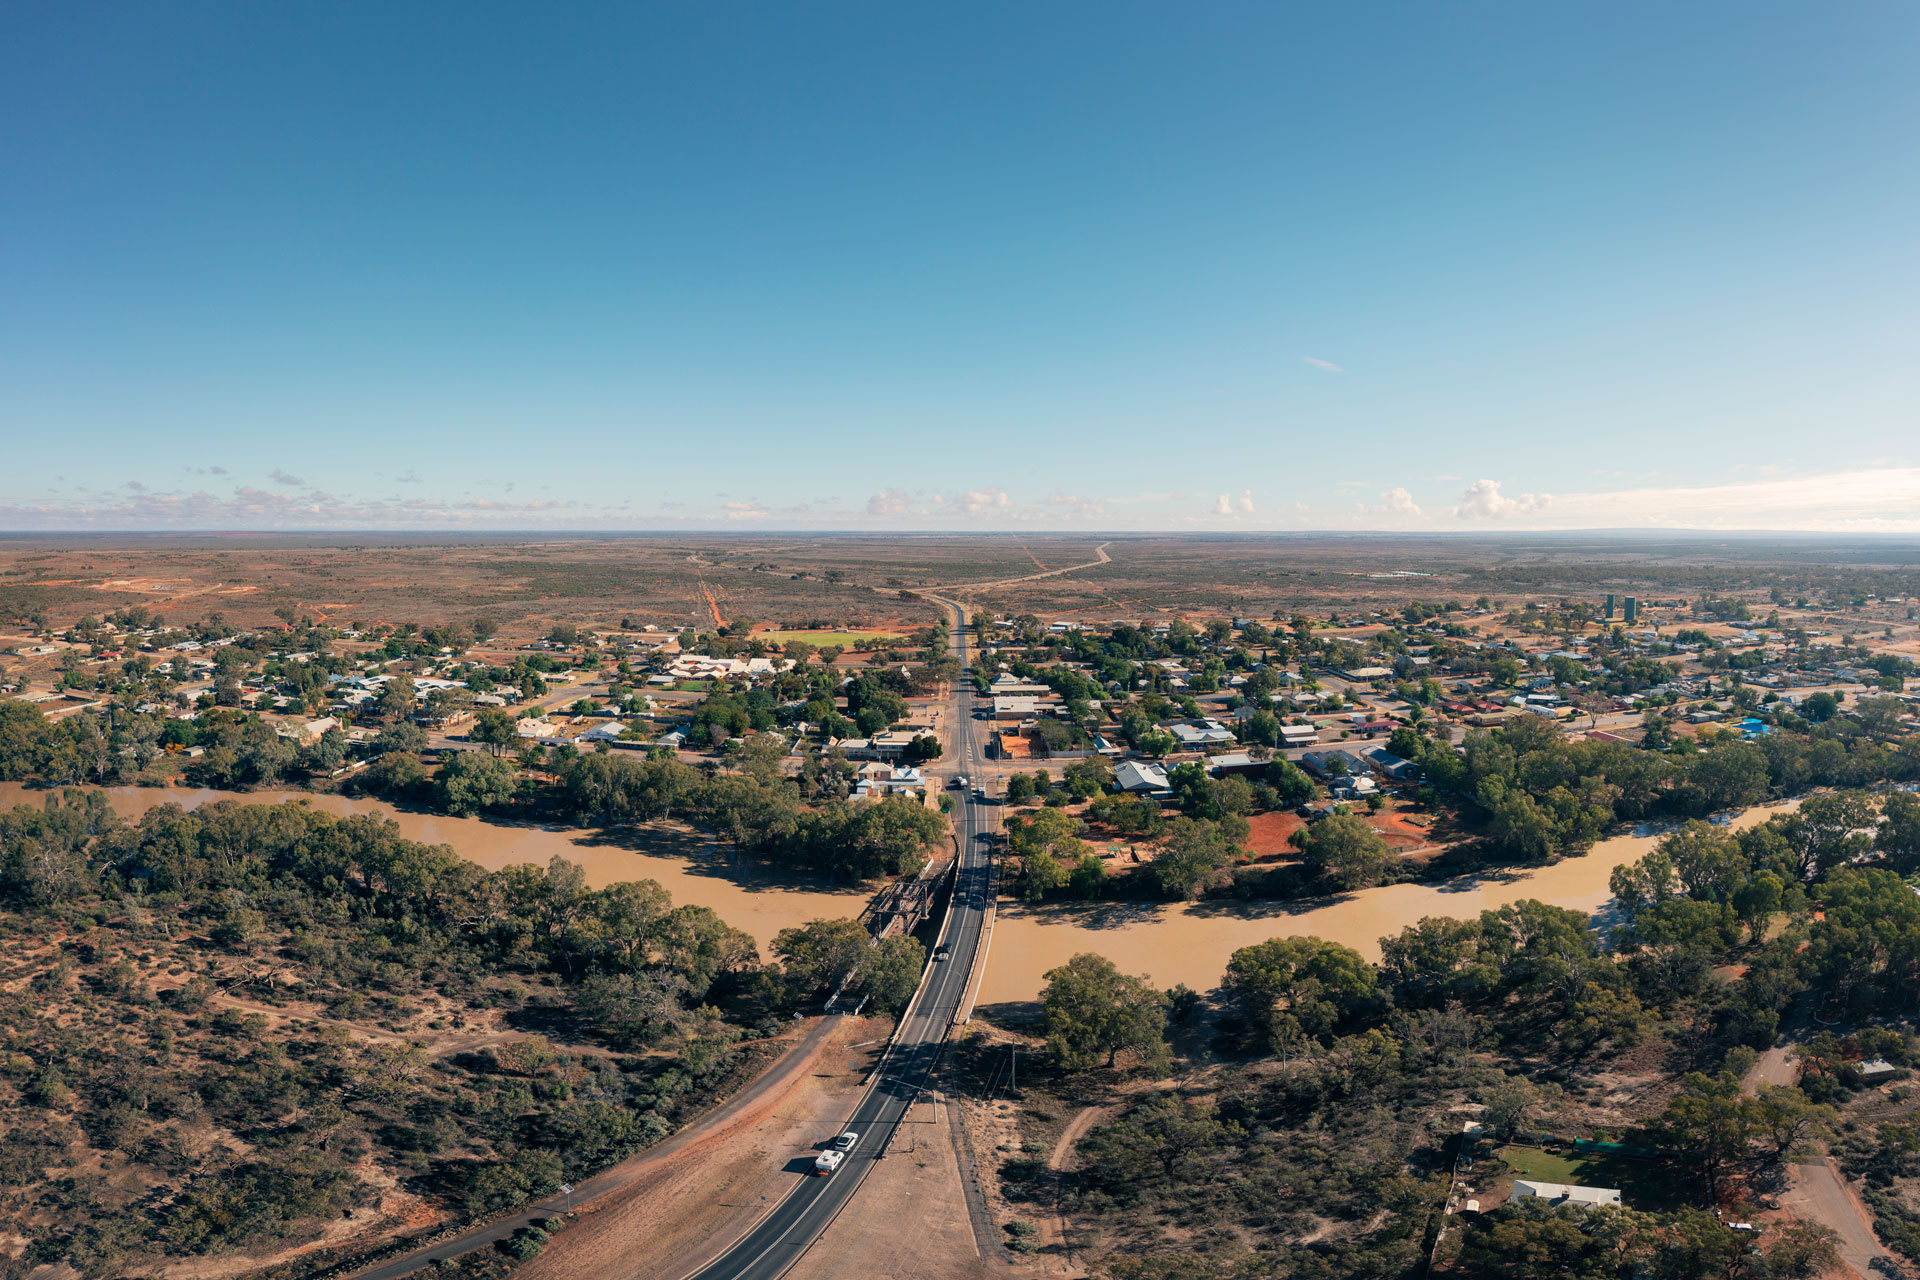 The Township of Wilcannia. Photo Credit: Destination NSW